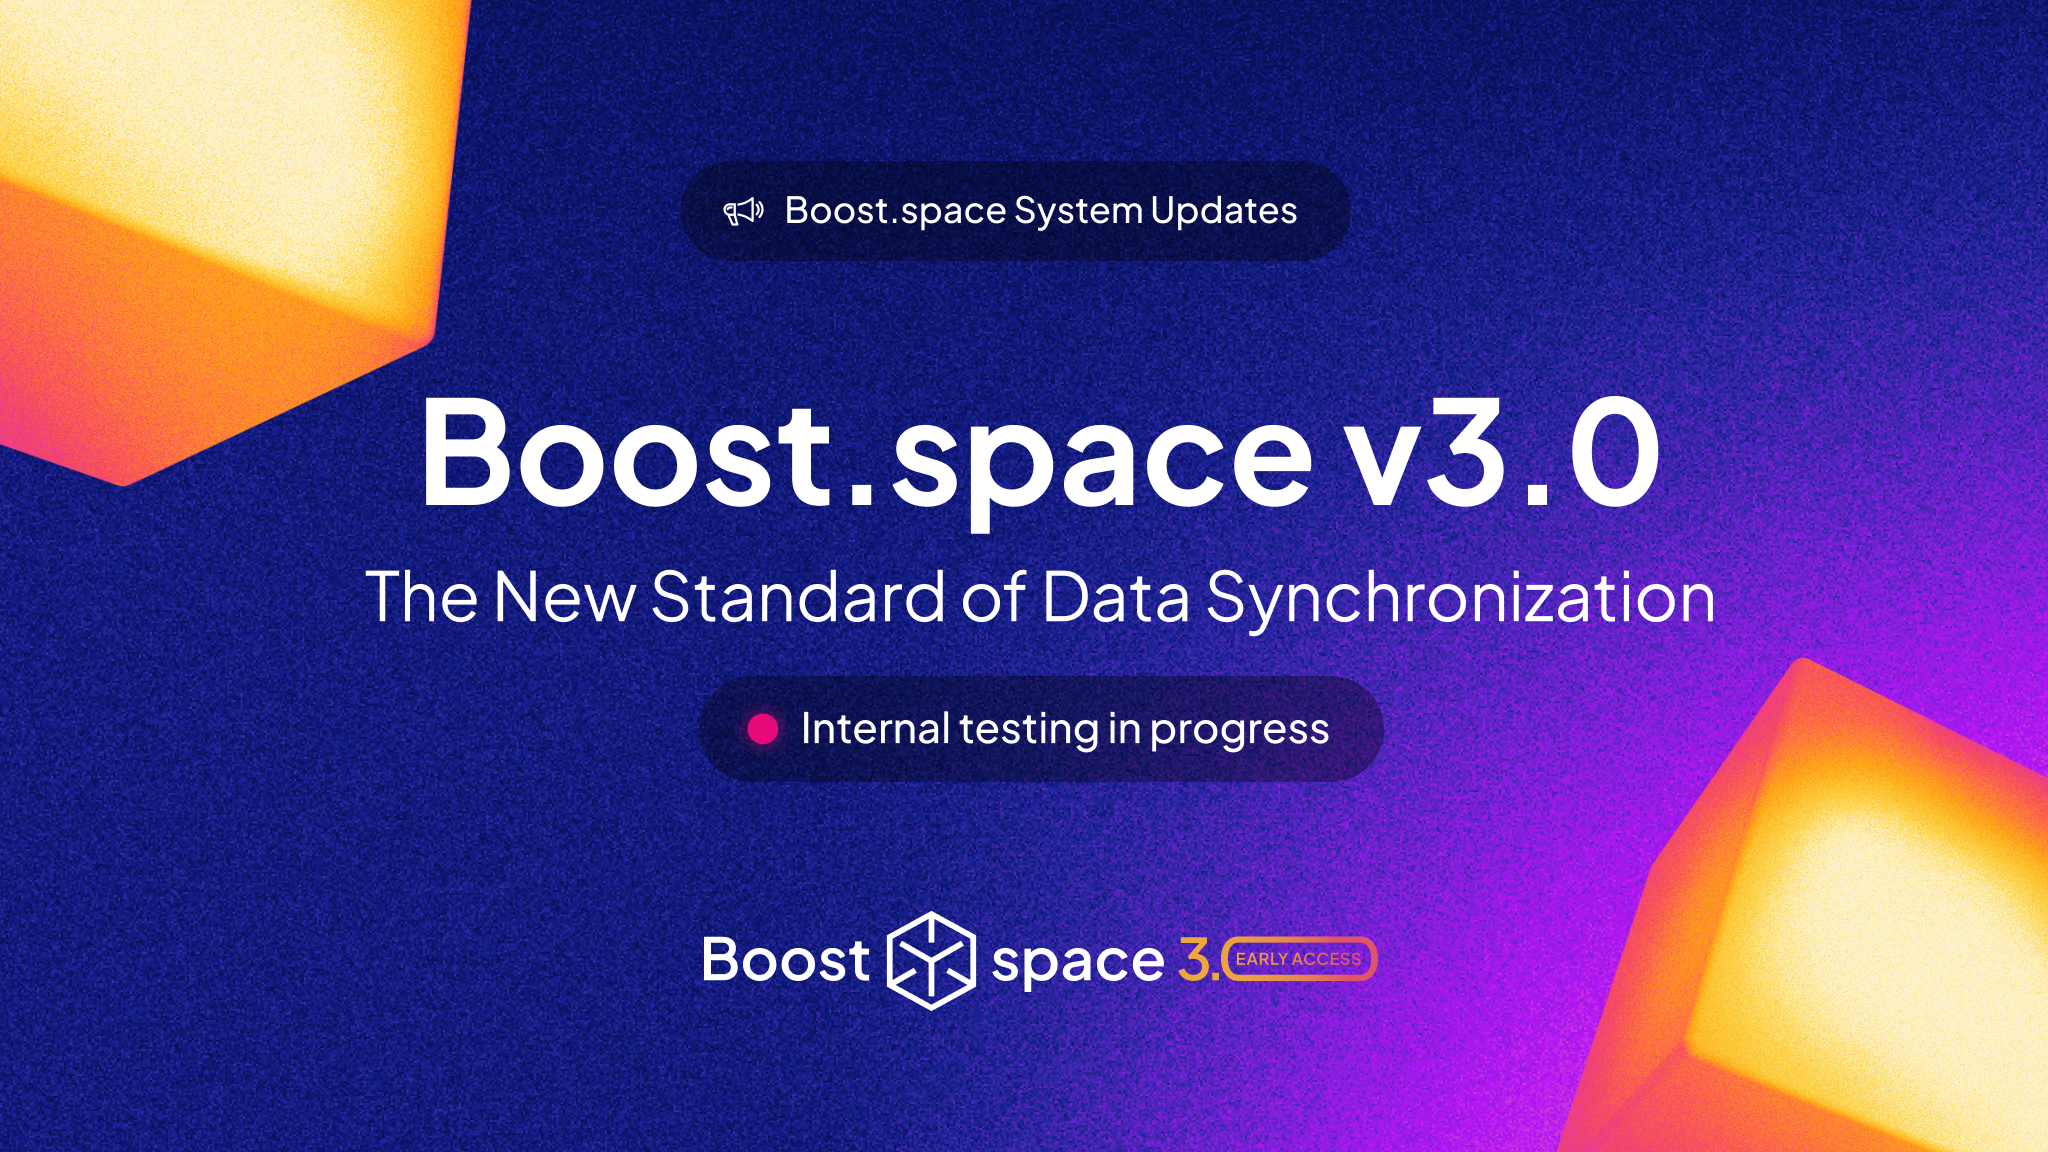 Boost.space 3.0: The New Standard of Data Synchronization Is Almost Here